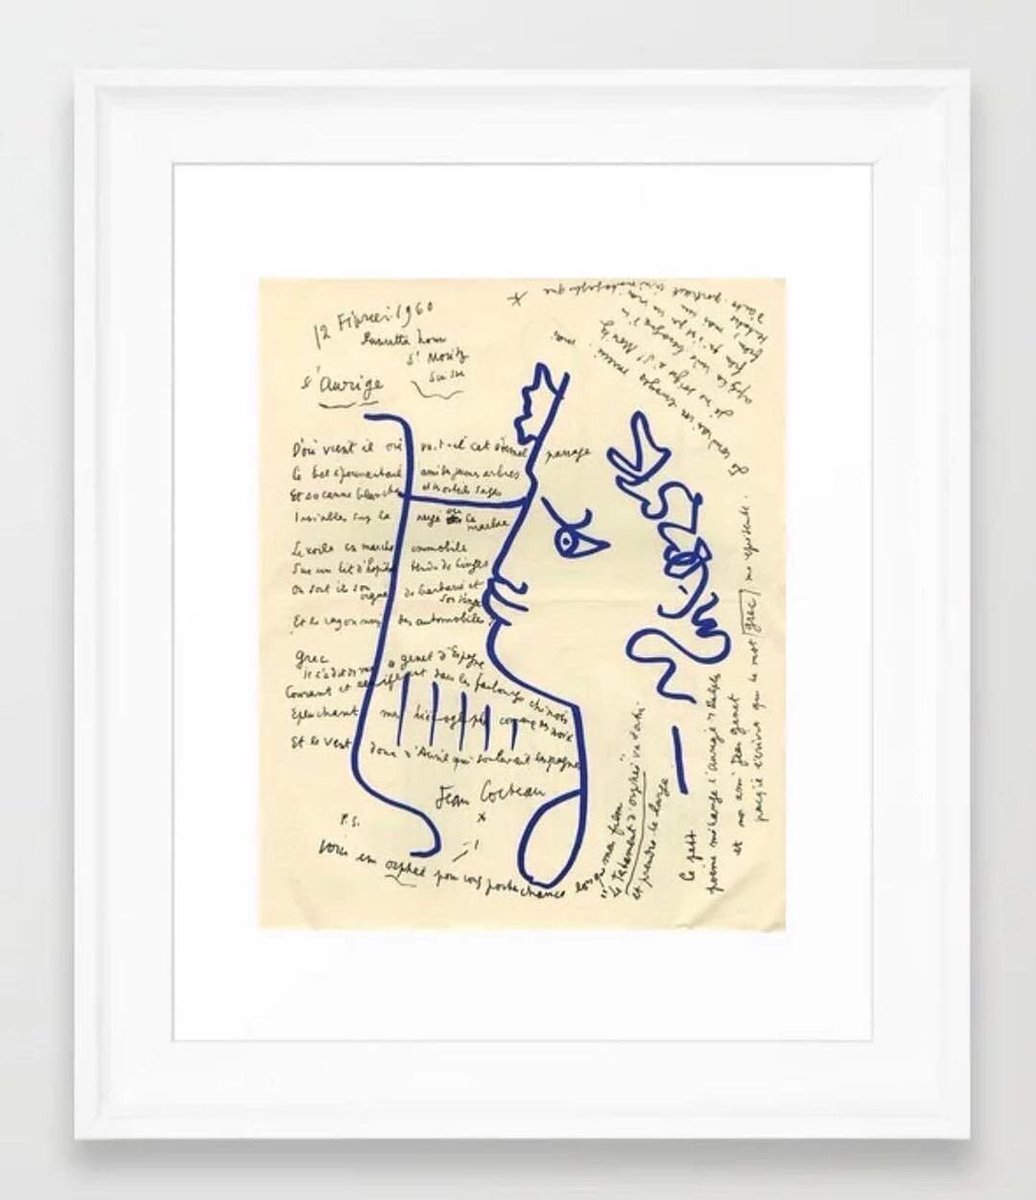 ⭐️Cocteau Rhymes⭐️

A couple of the many products available in this print.

Society6.com/wankerandwanker 

#cocteau #rhymes #life #love #sale #shopping #gift #onlineshopping #shoppingonline #christmas #artist  #art #jeancocteau #france